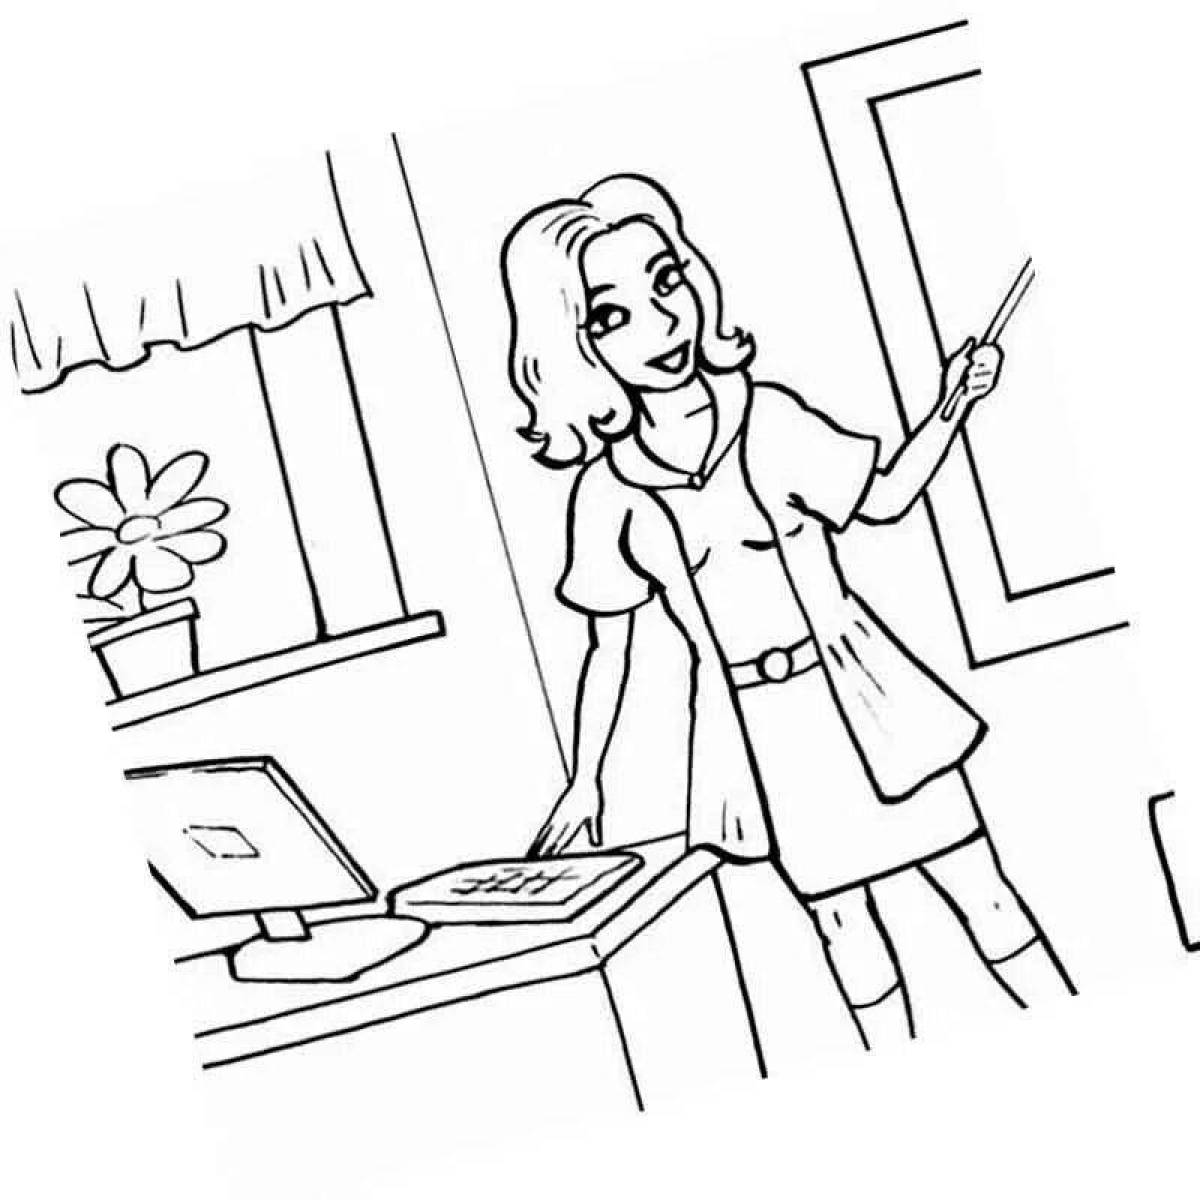 Angry teacher coloring page